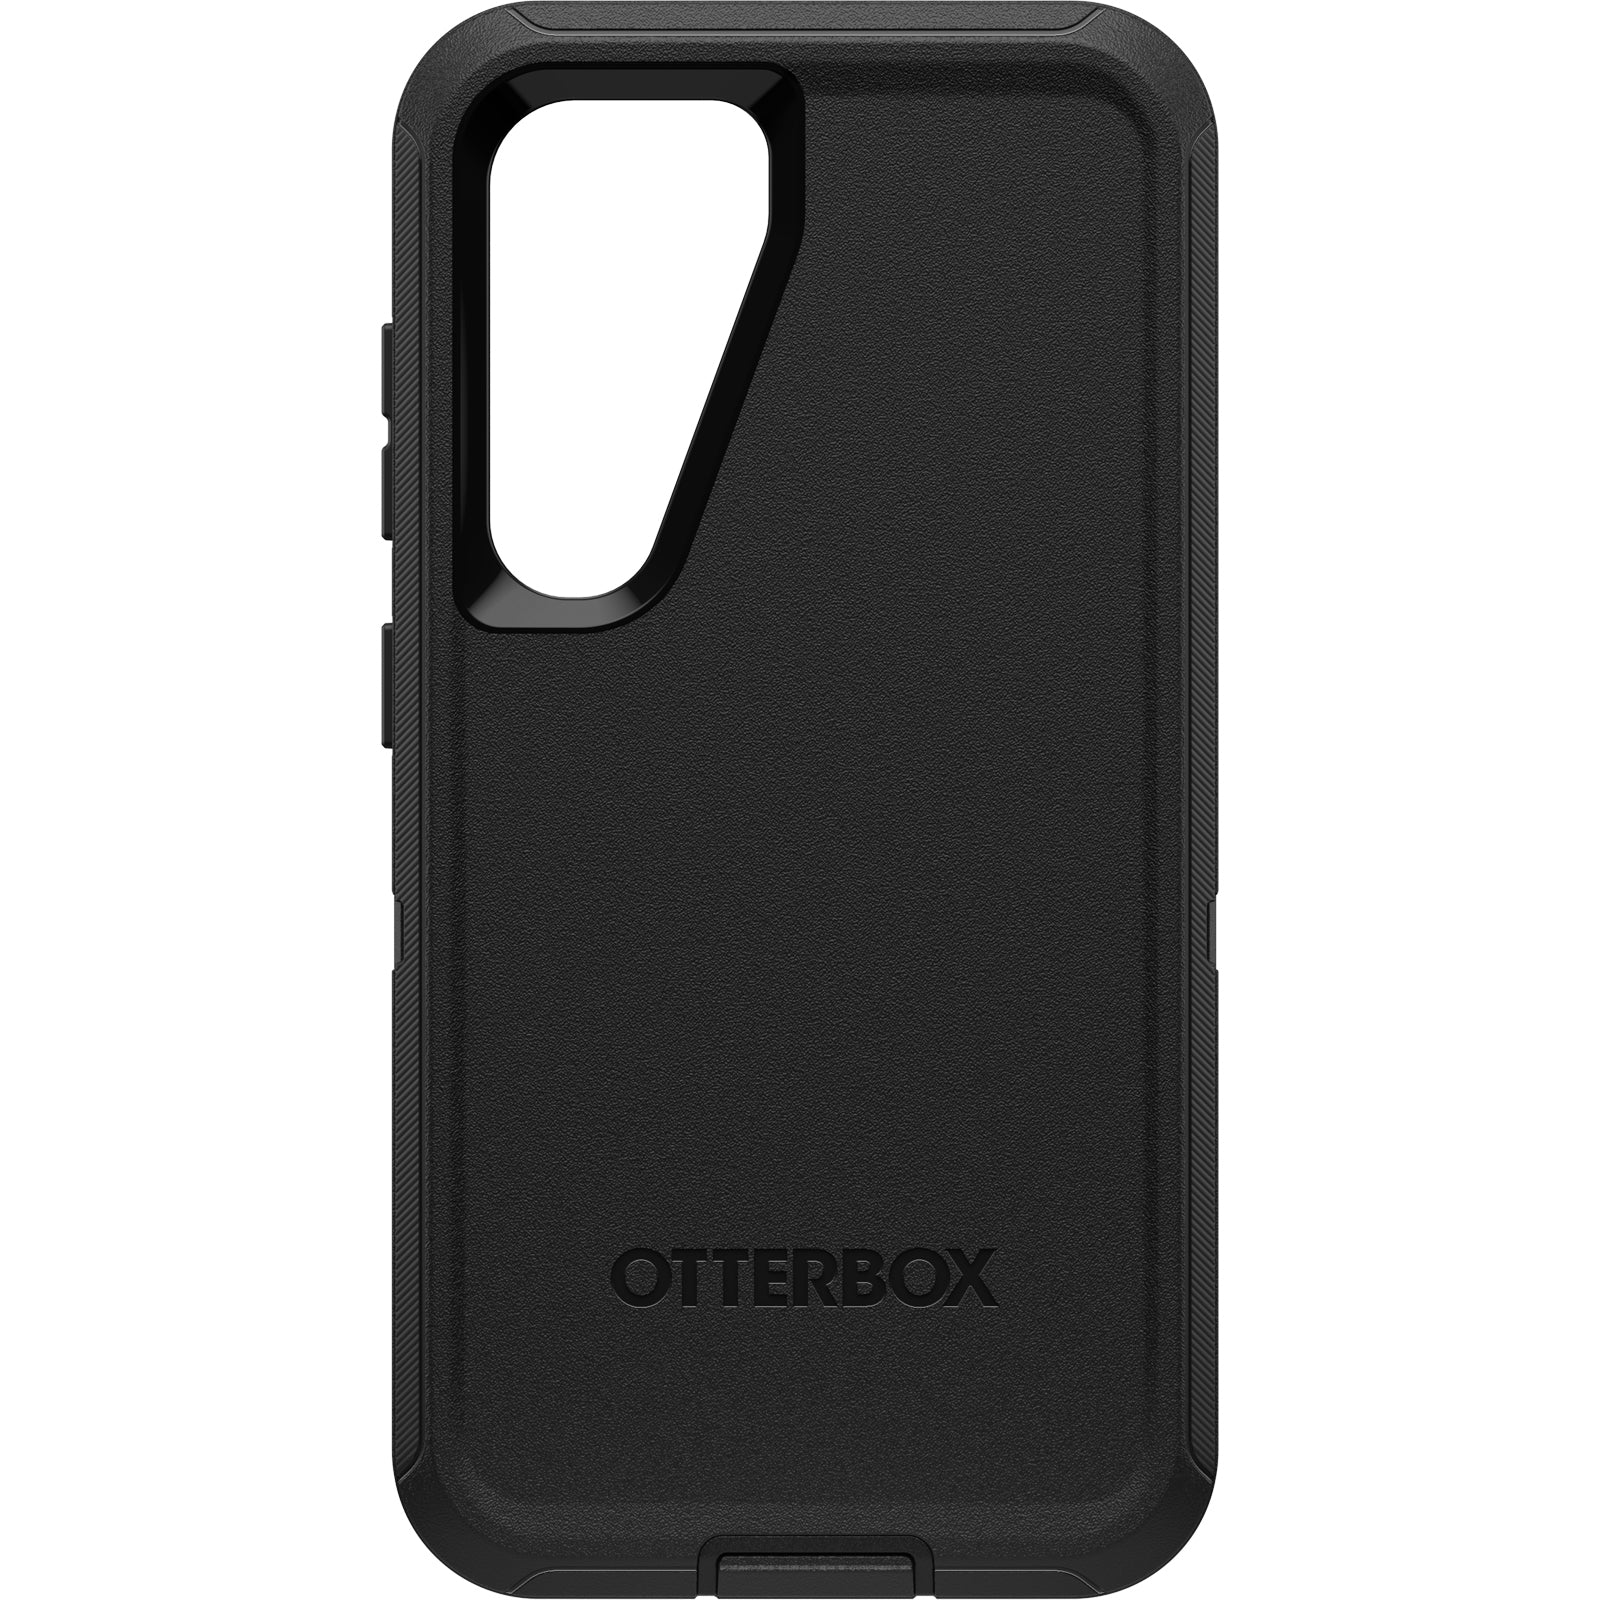 OtterBox Defender Case for Galaxy S23, Shockproof, Drop Proof, Ultra-Rugged, Protective Case, 4x Tested to Military Standard, Black